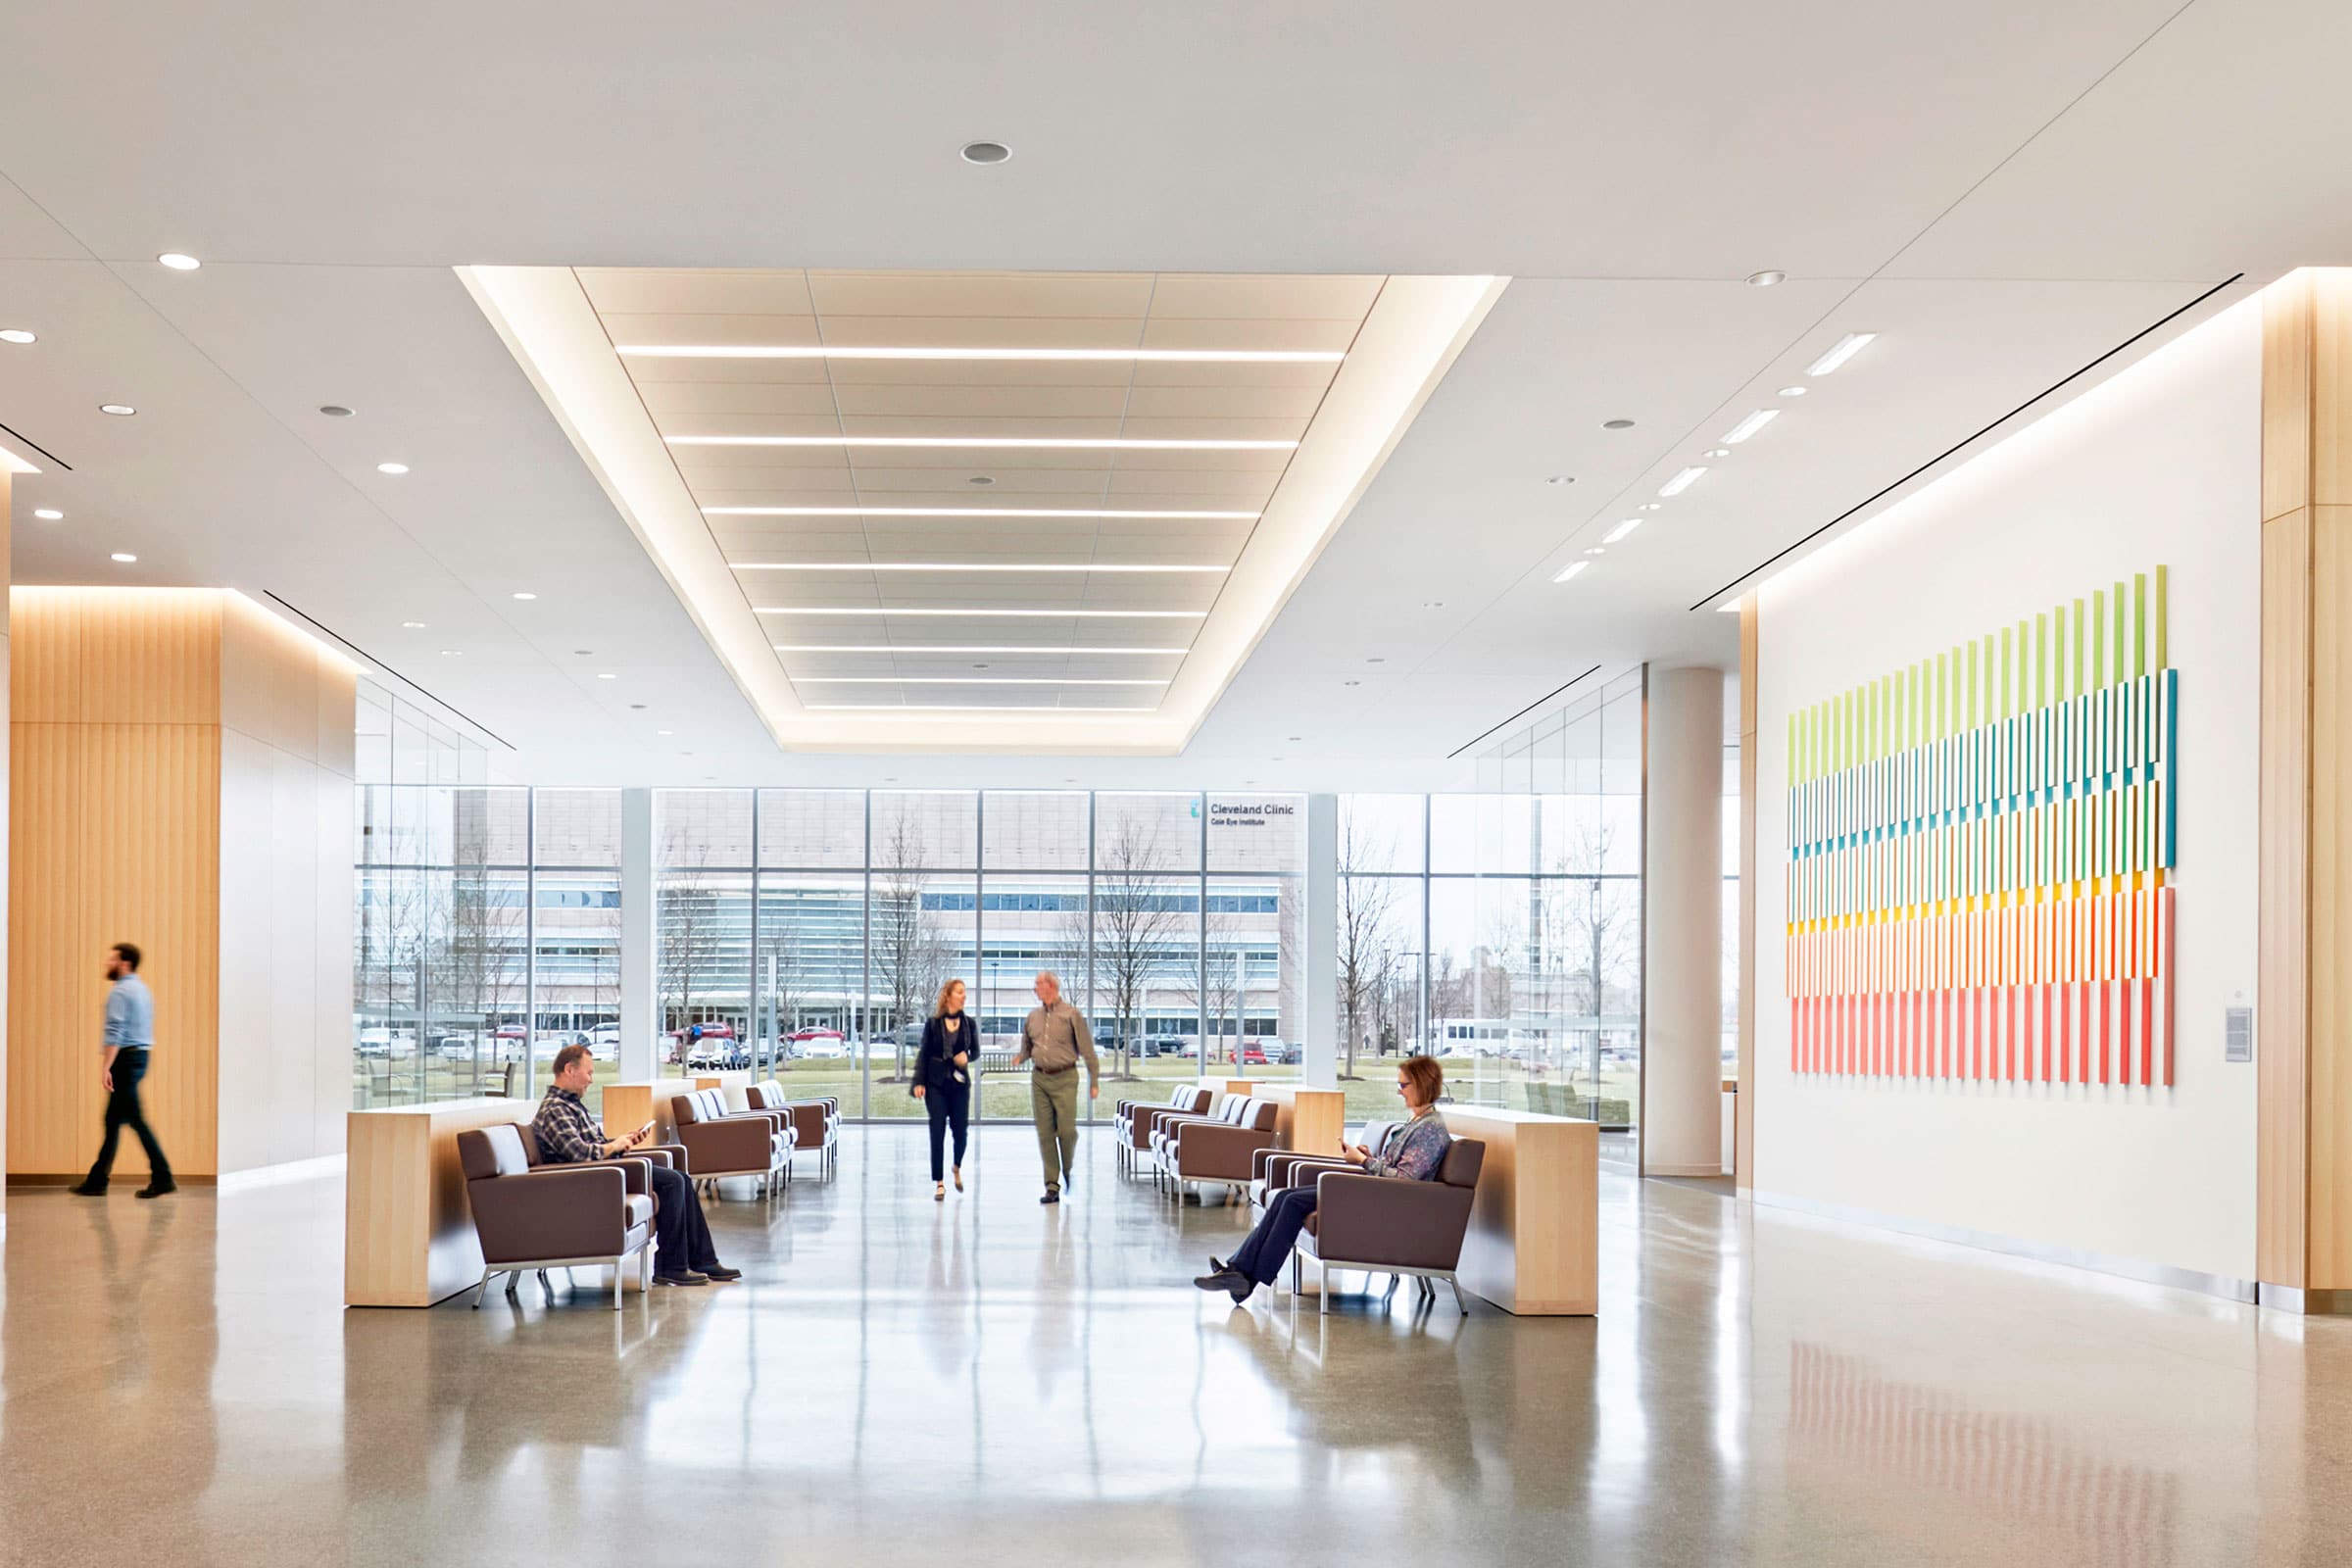 What Patient-Centric Design Really Means at Cleveland Clinic